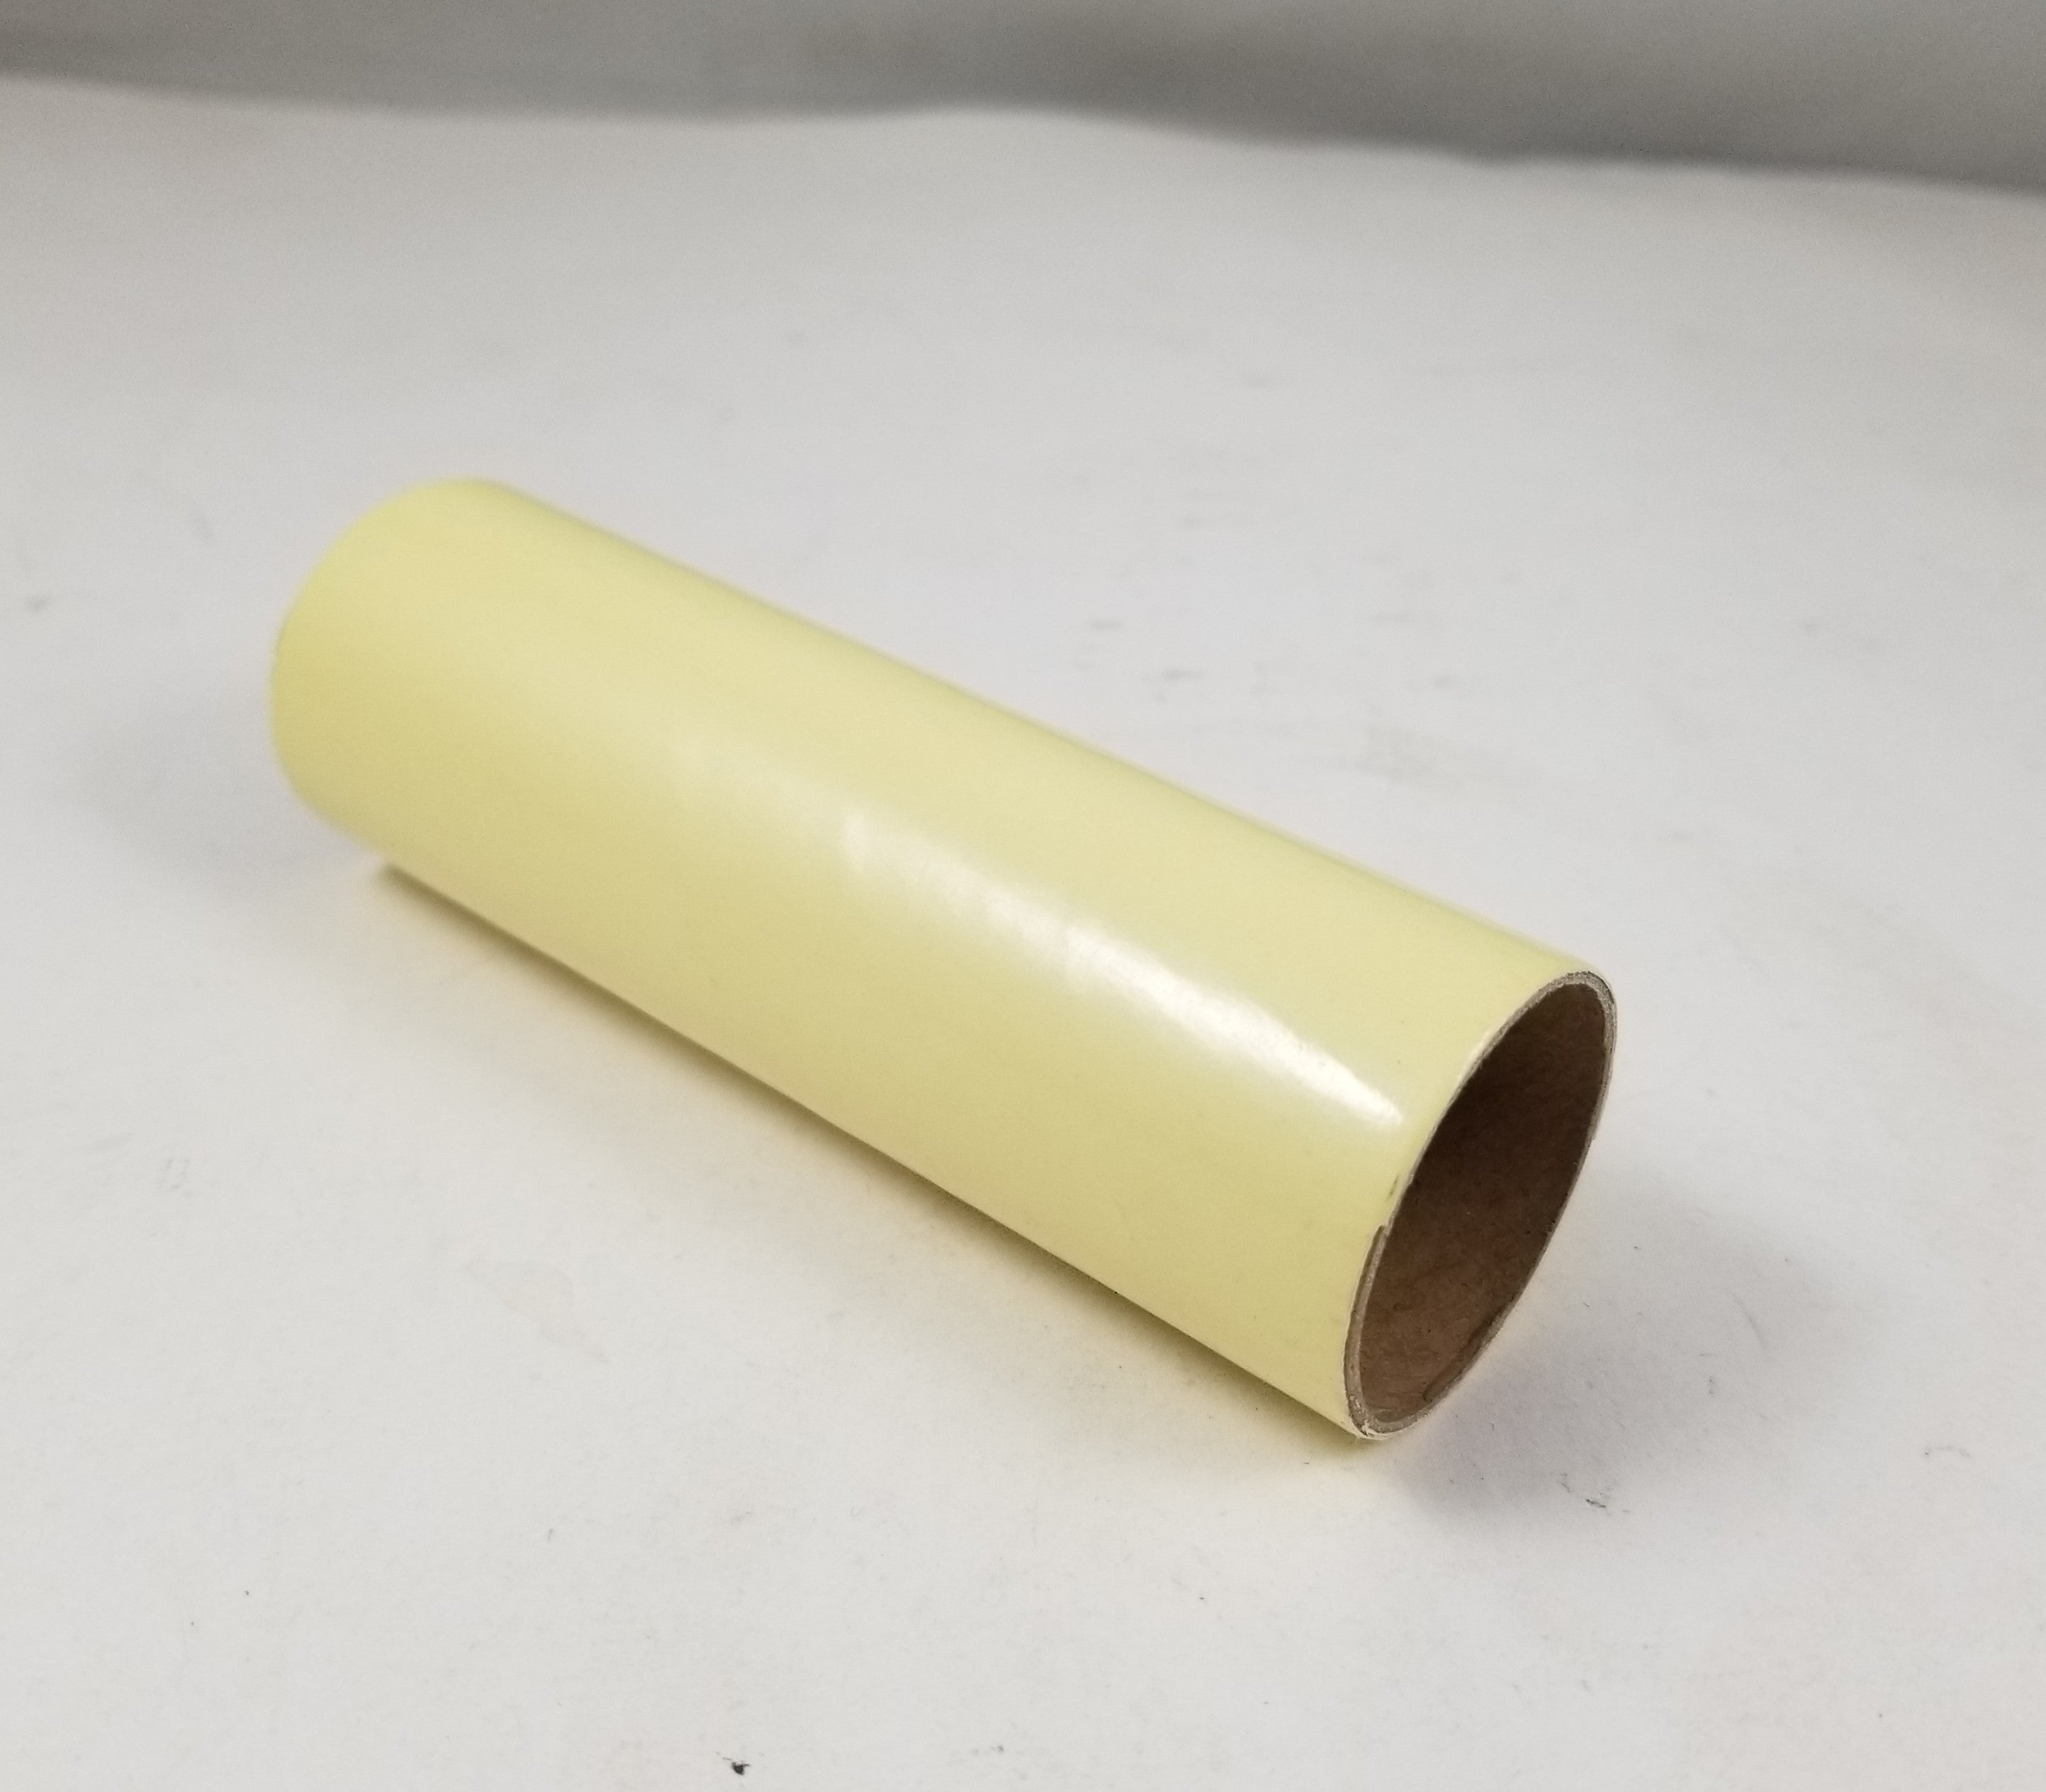 4" Paper Candle Cover in Beige